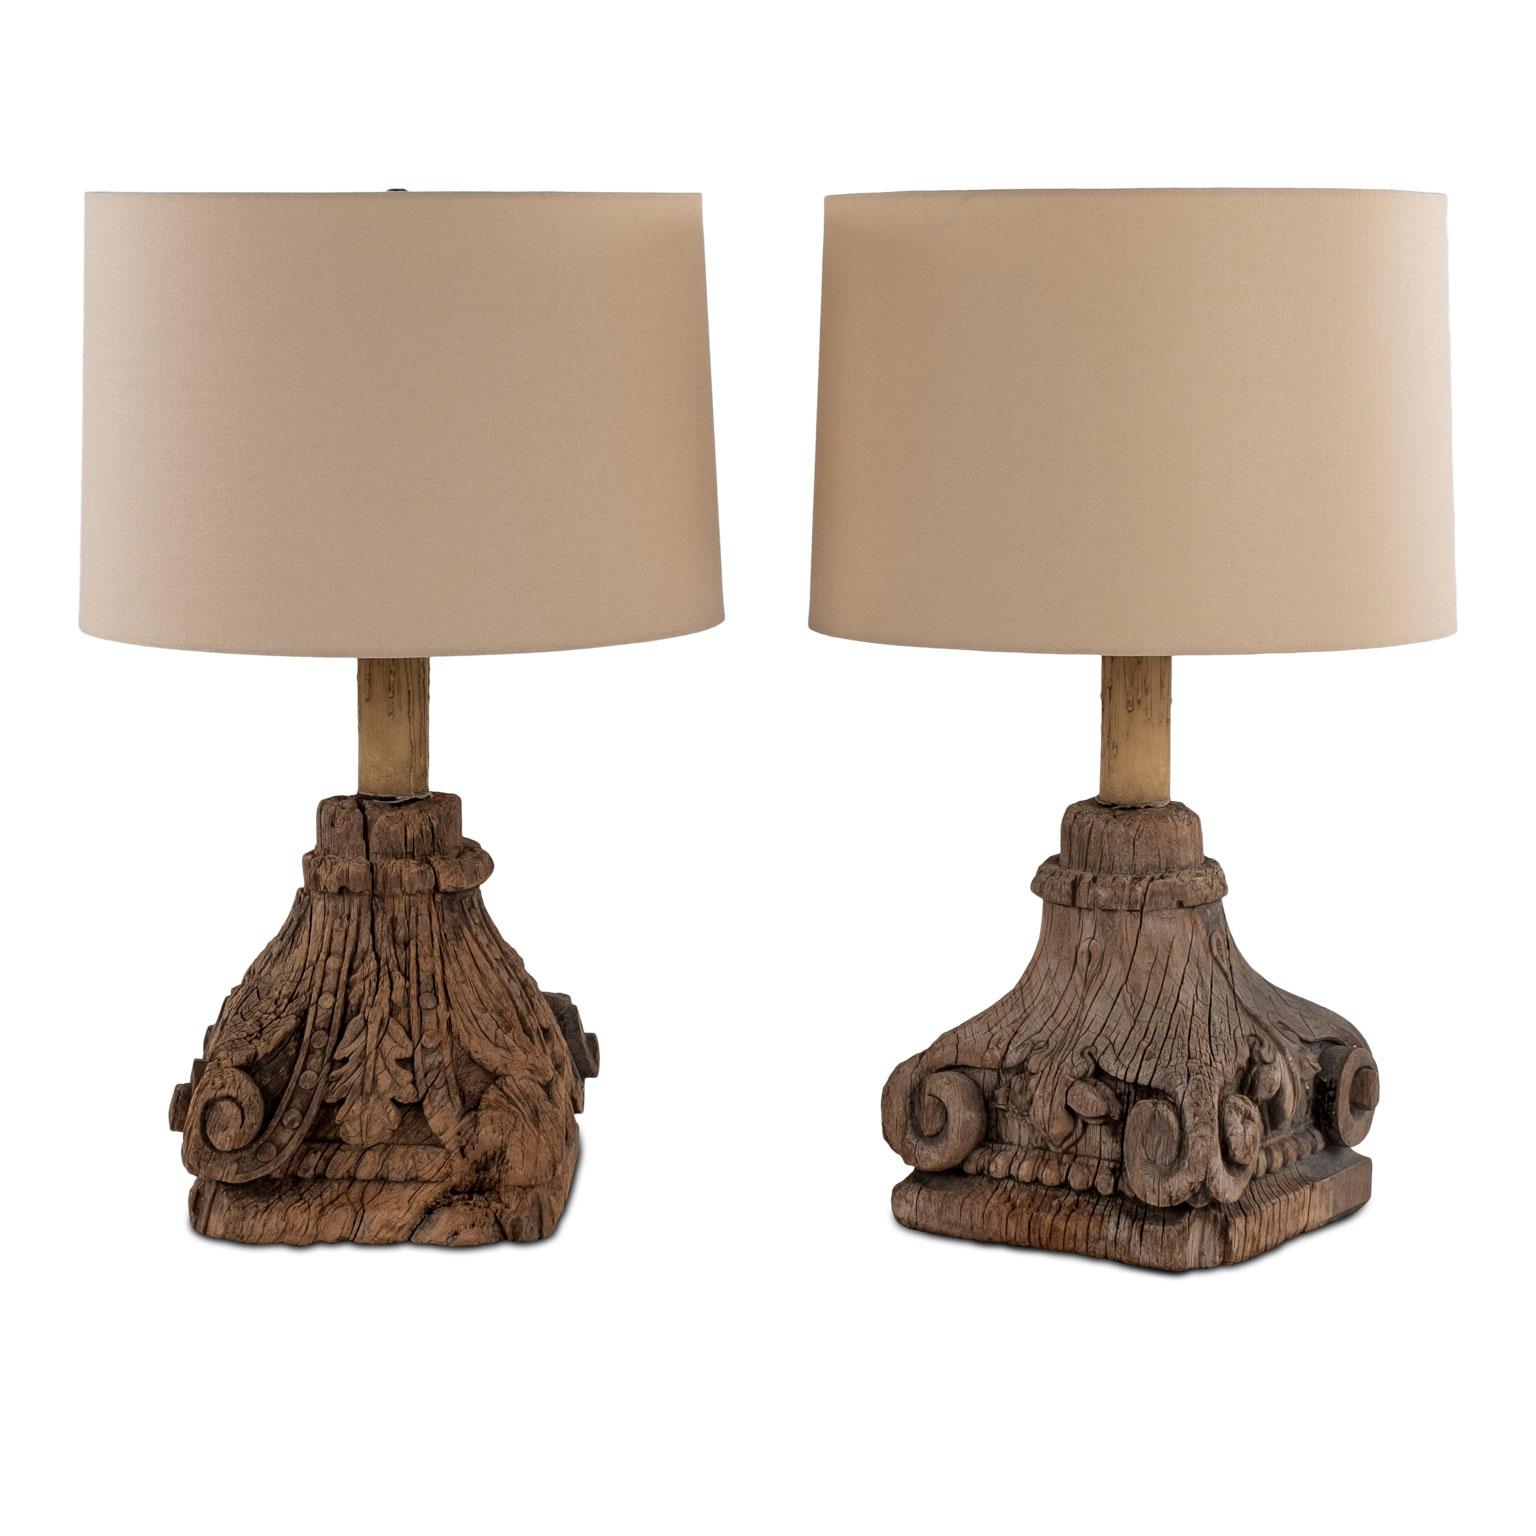 Pair of carved capital table lamps, custom table lamps created from hand carved 18th century architectural fragments. Mounted on custom wood stands. Newly wired for use within the USA using all UL listed parts. Include beige linen shades.